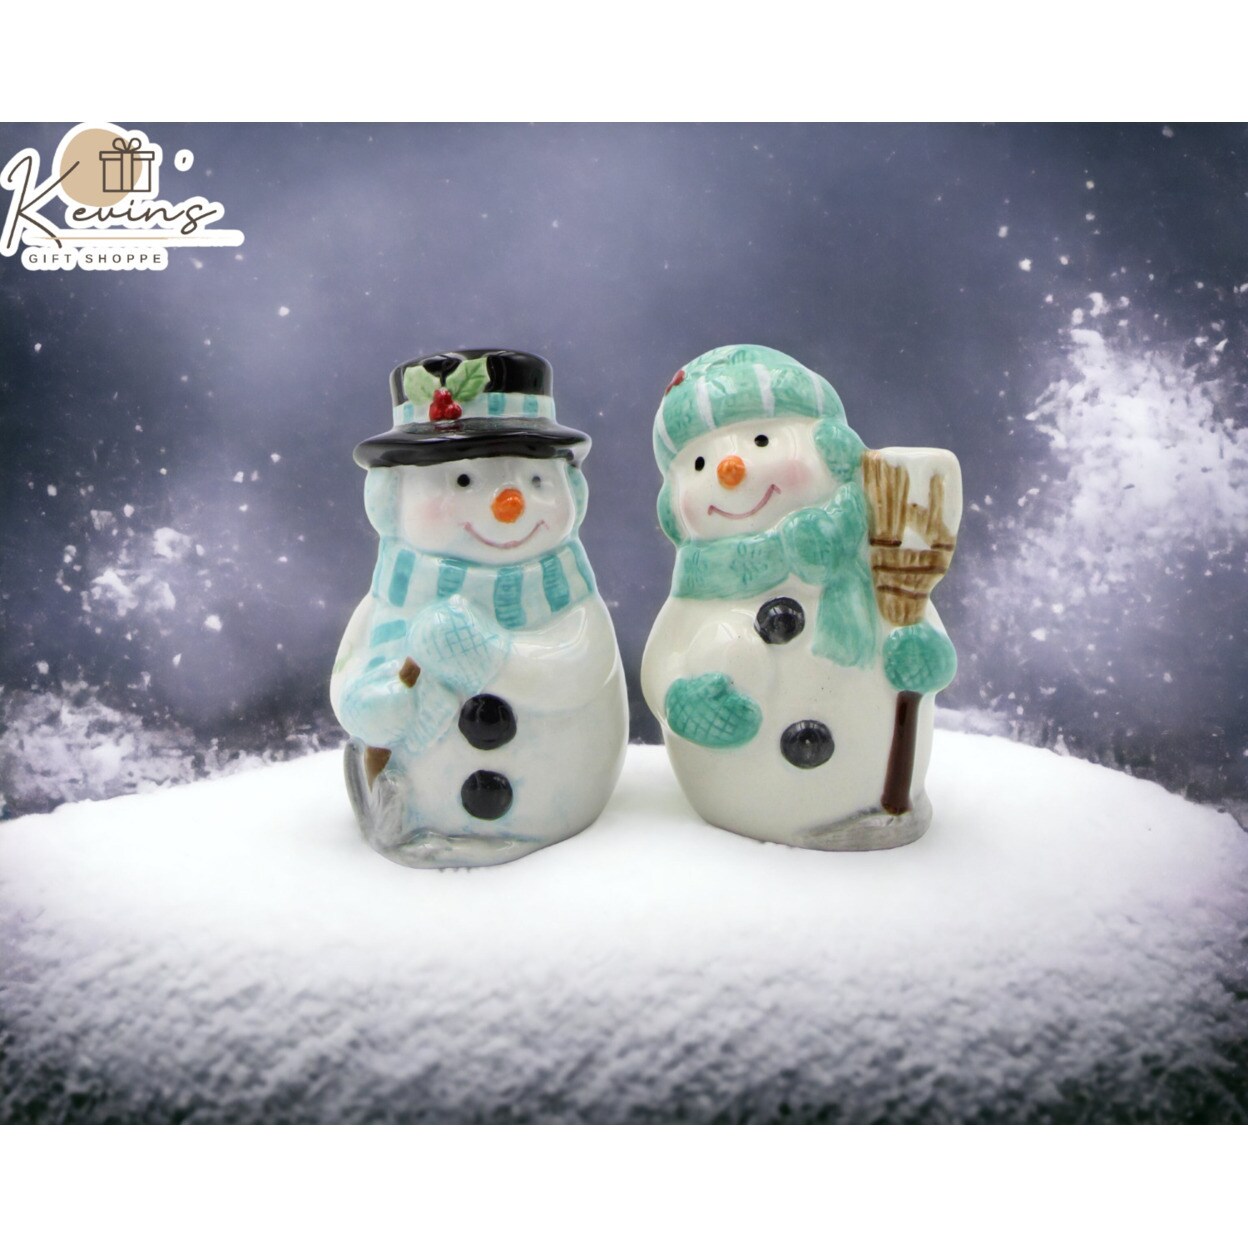 kevinsgiftshoppe Ceramic  Blue and Green Snowman Salt and Pepper Shakers Home Decor   Kitchen Decor